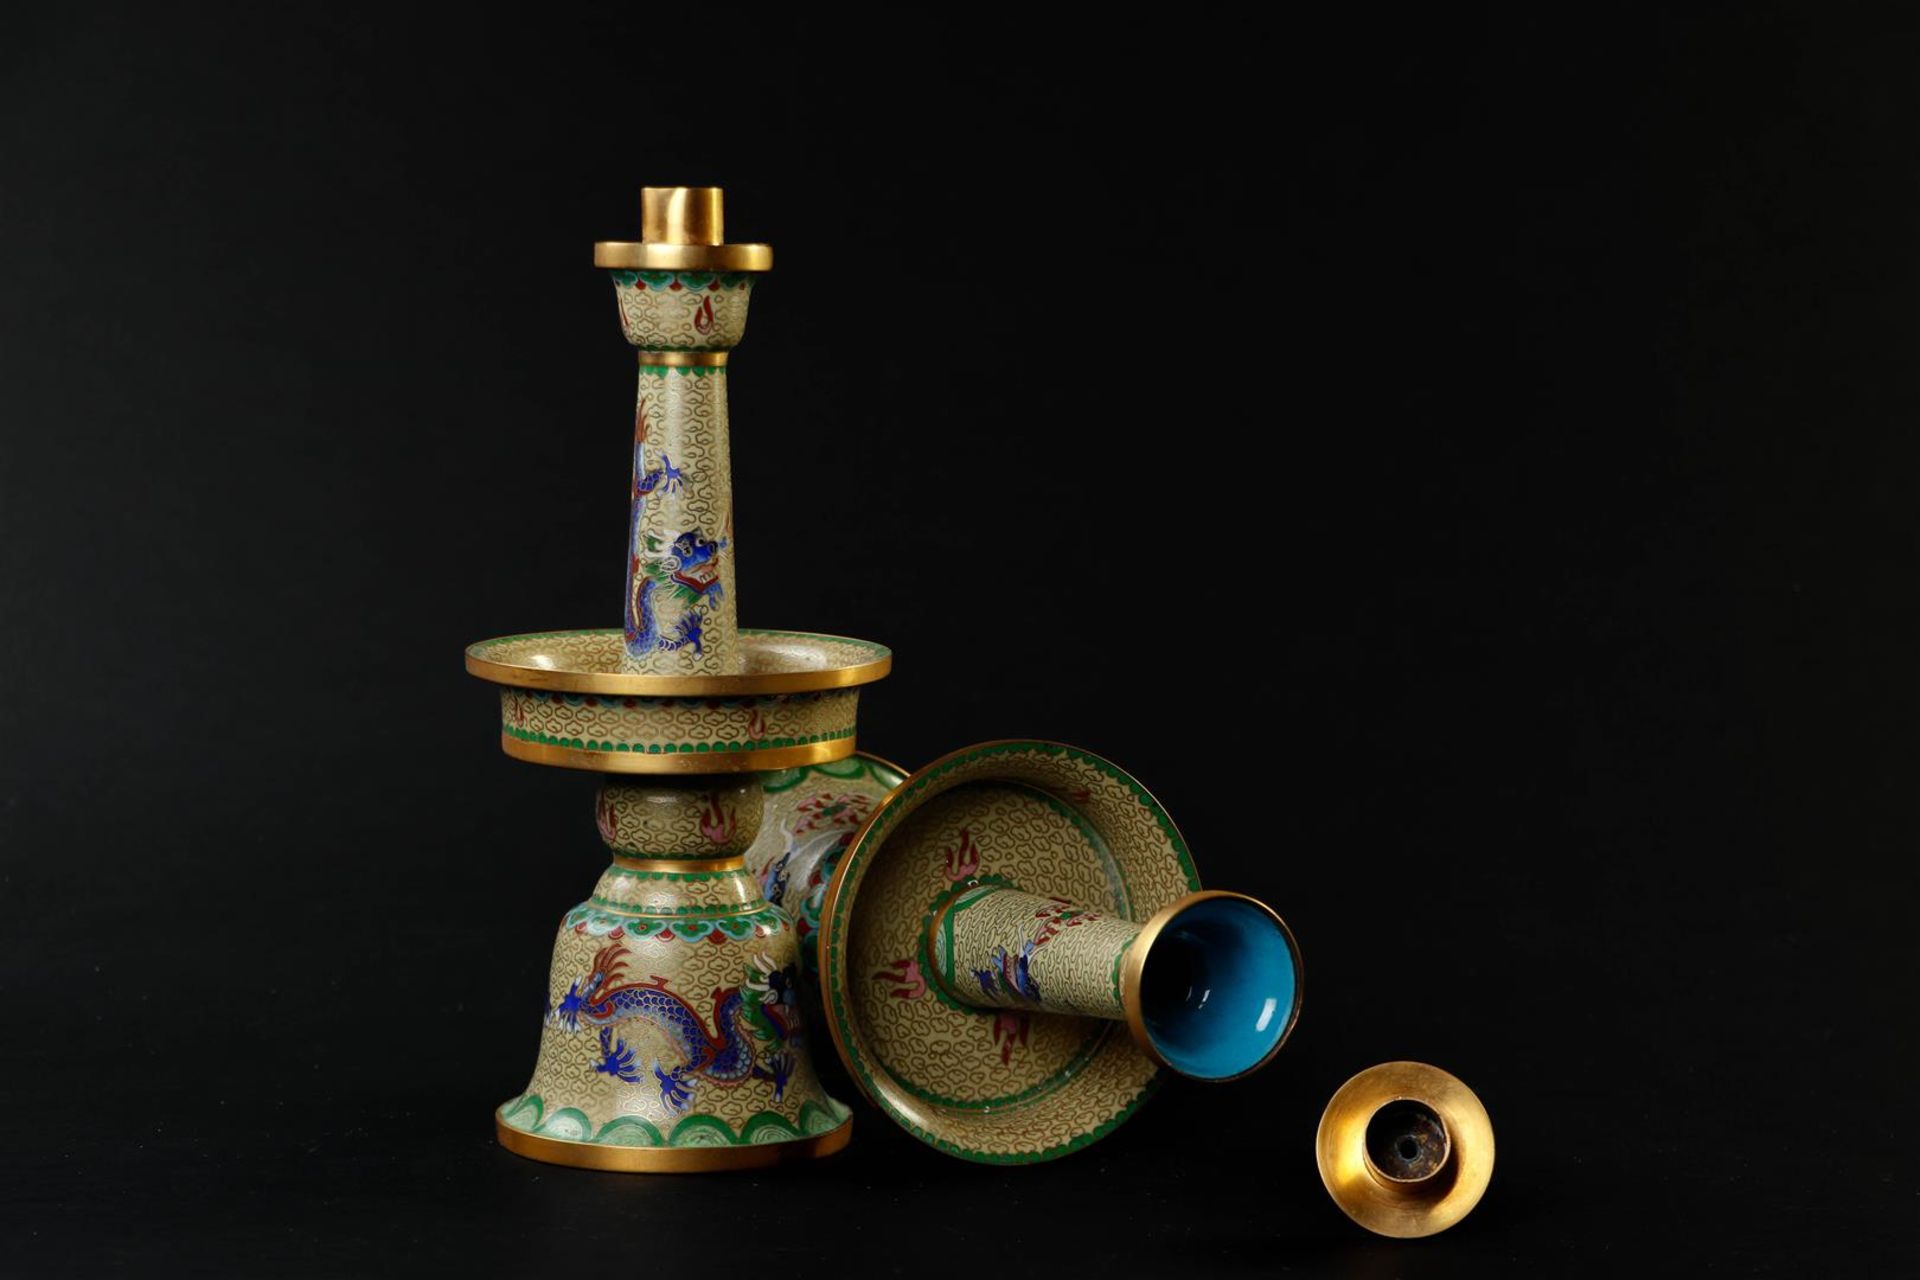 A pair of cloisonne candlesticks decorated with dragons. China, 20th century.
H. 27 cm. - Image 5 of 5